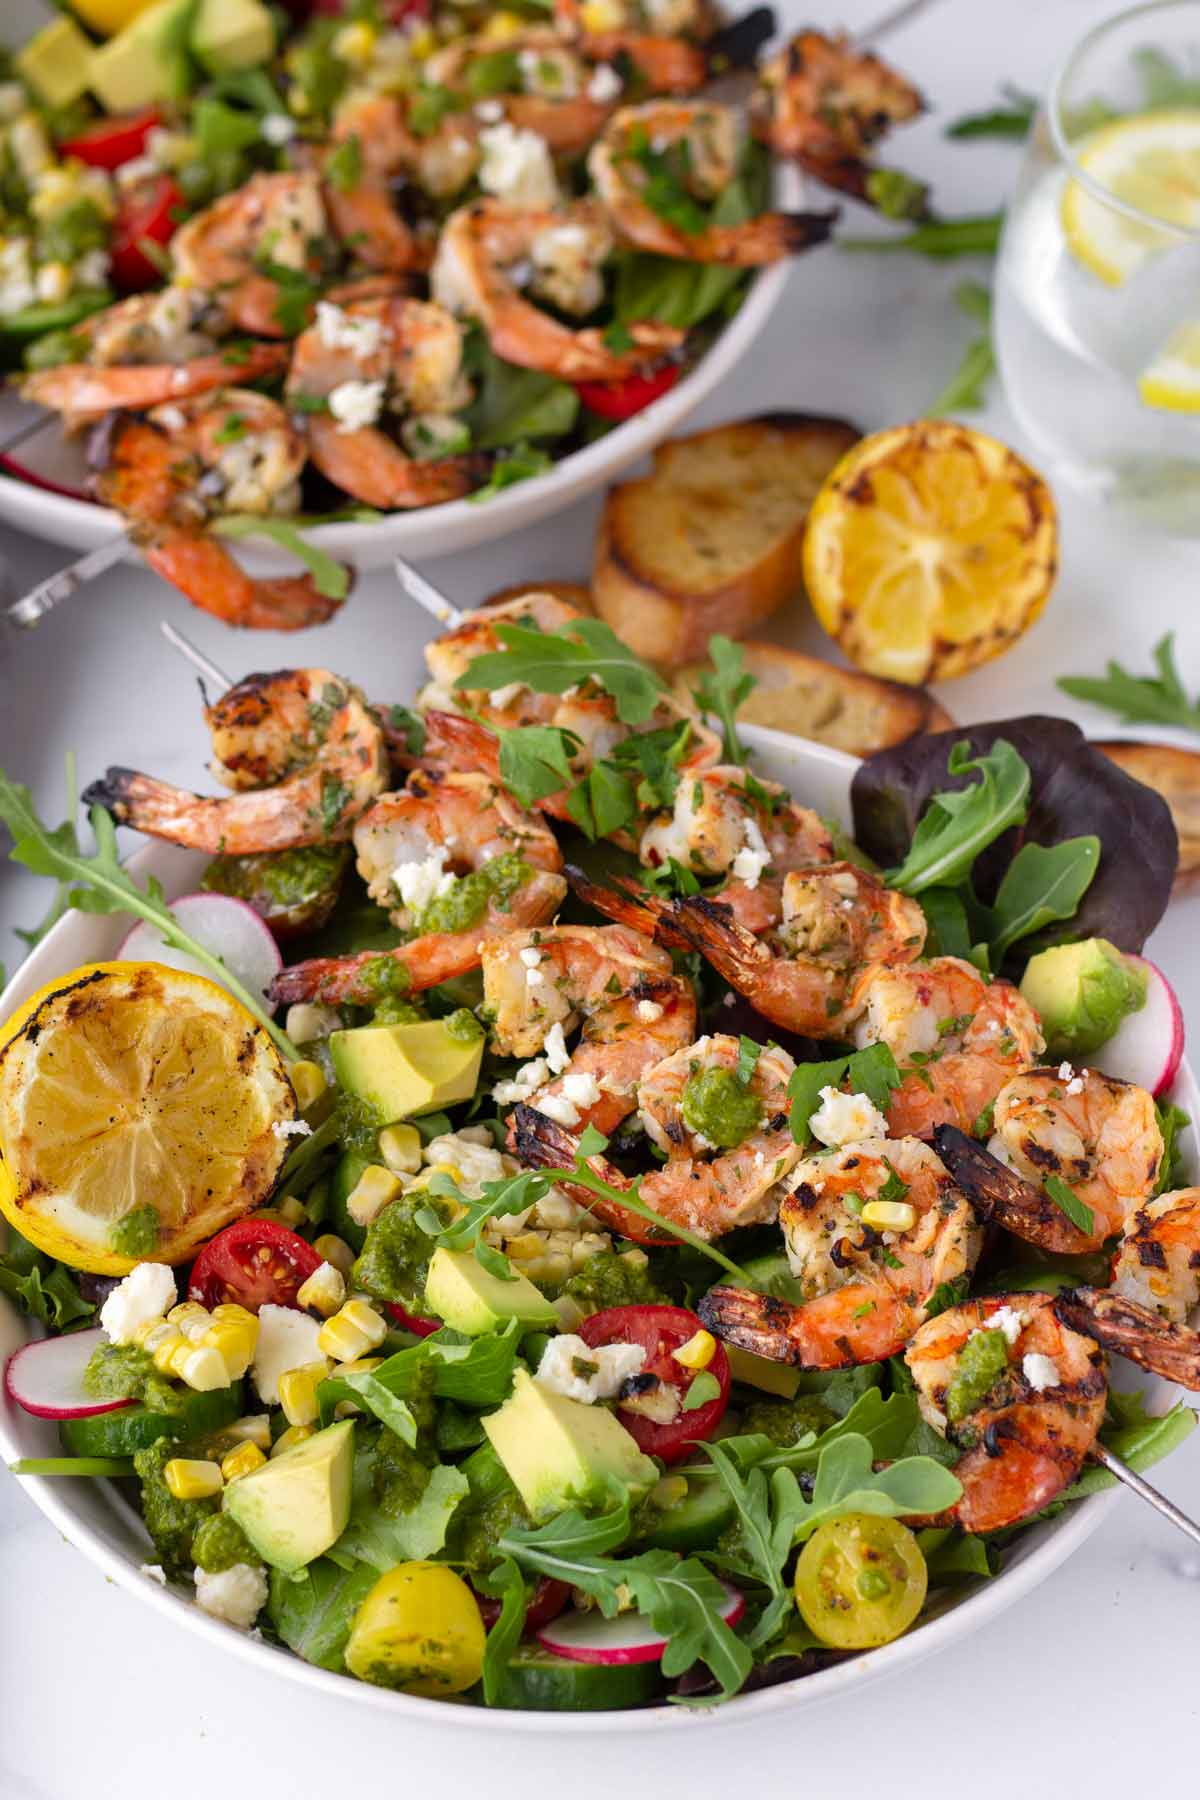 green salad mix with grilled skewers shrimp